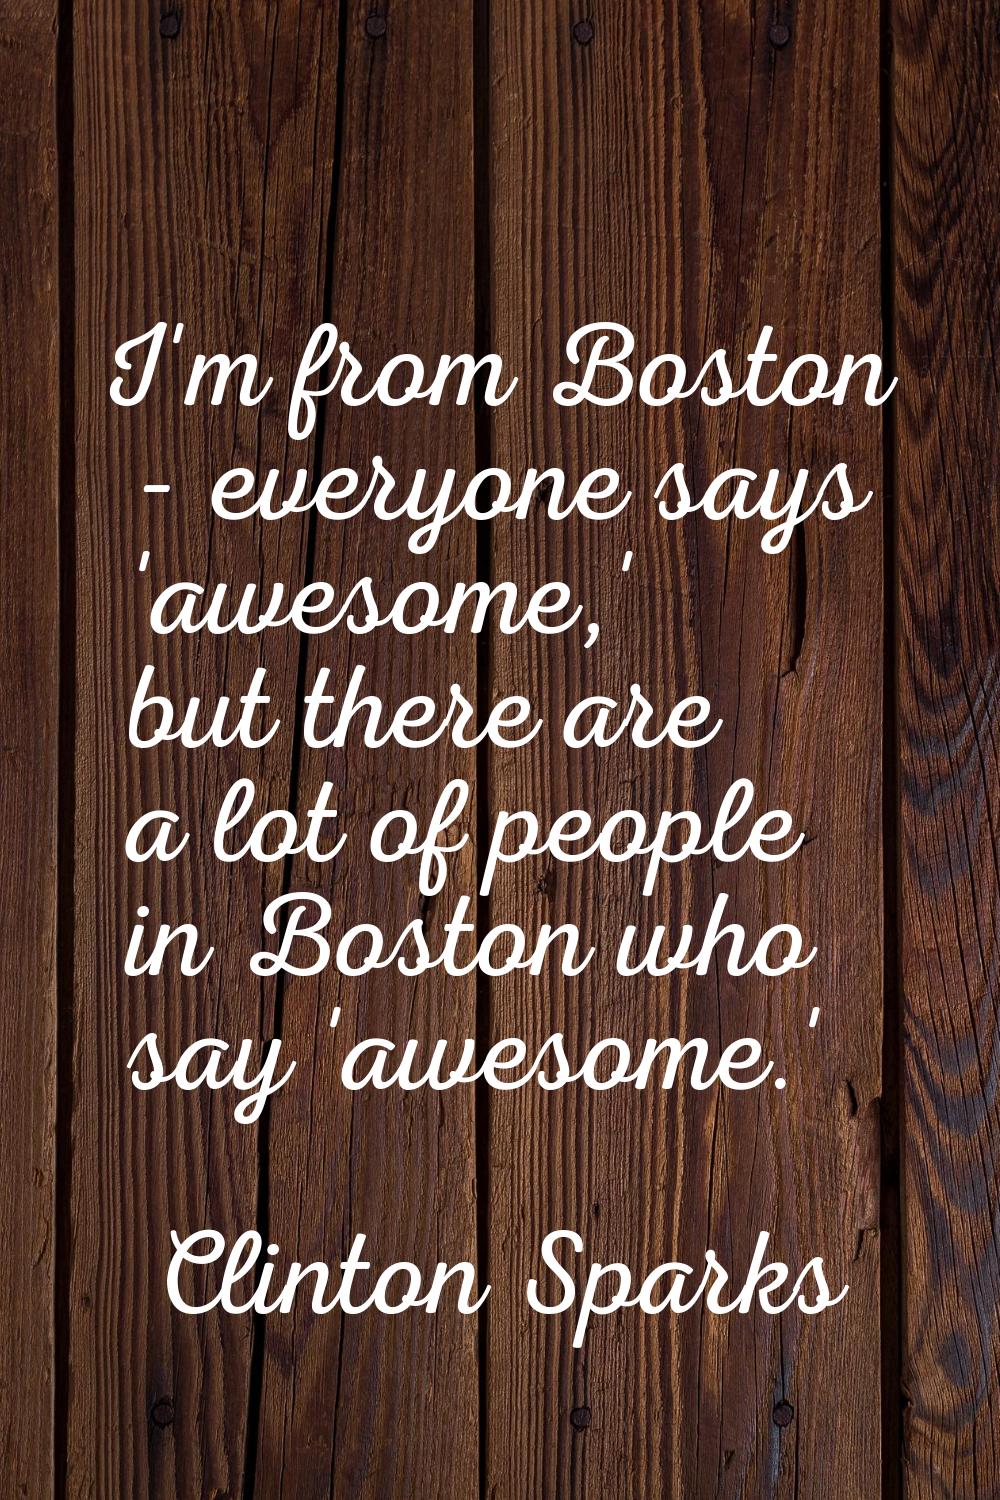 I'm from Boston - everyone says 'awesome,' but there are a lot of people in Boston who say 'awesome